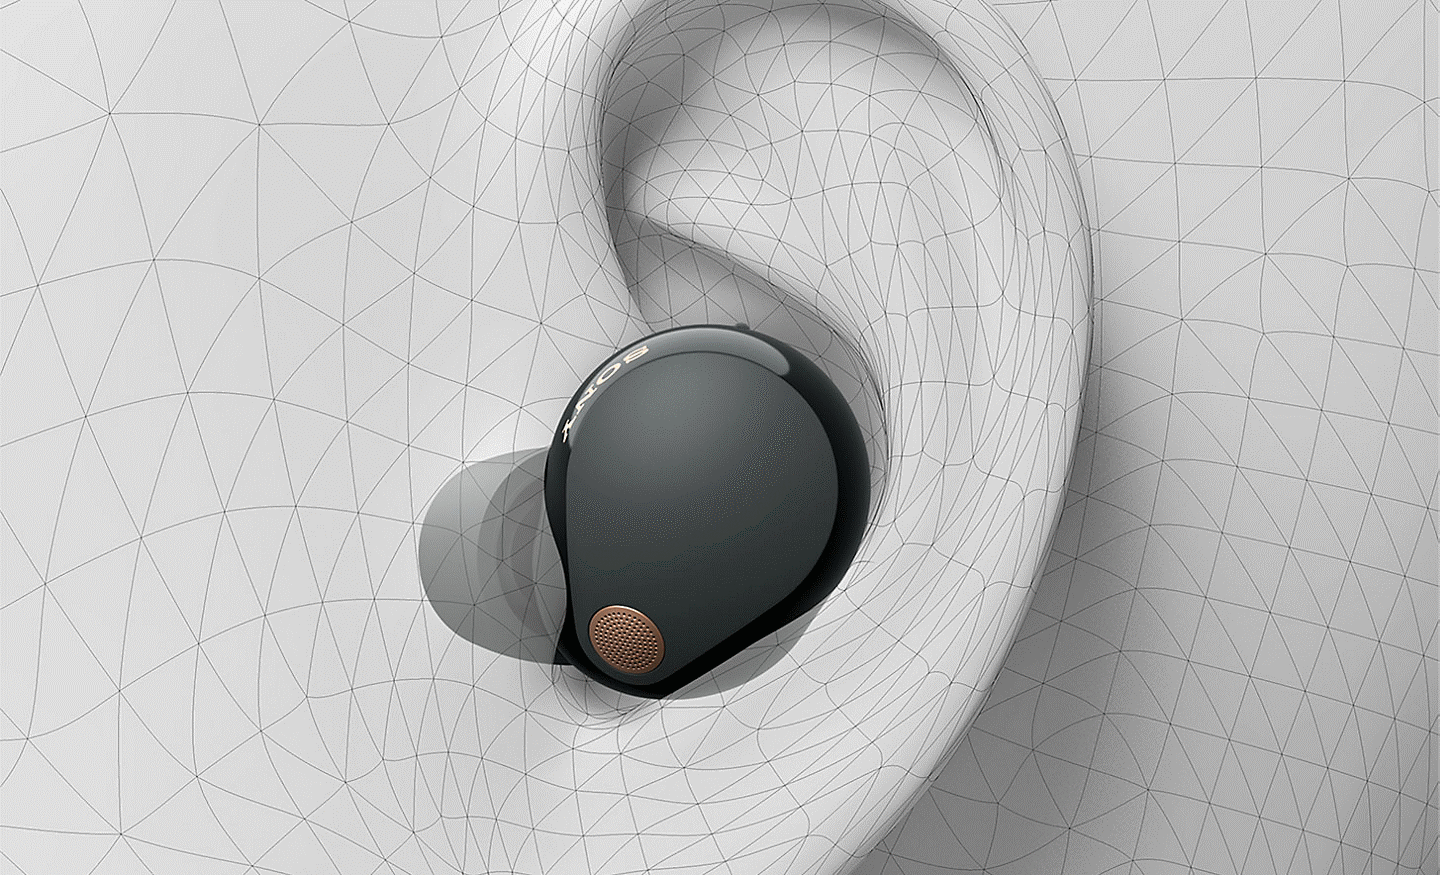  Image of the WF-1000XM5 headphone sitting inside a 3d drawing of an ear